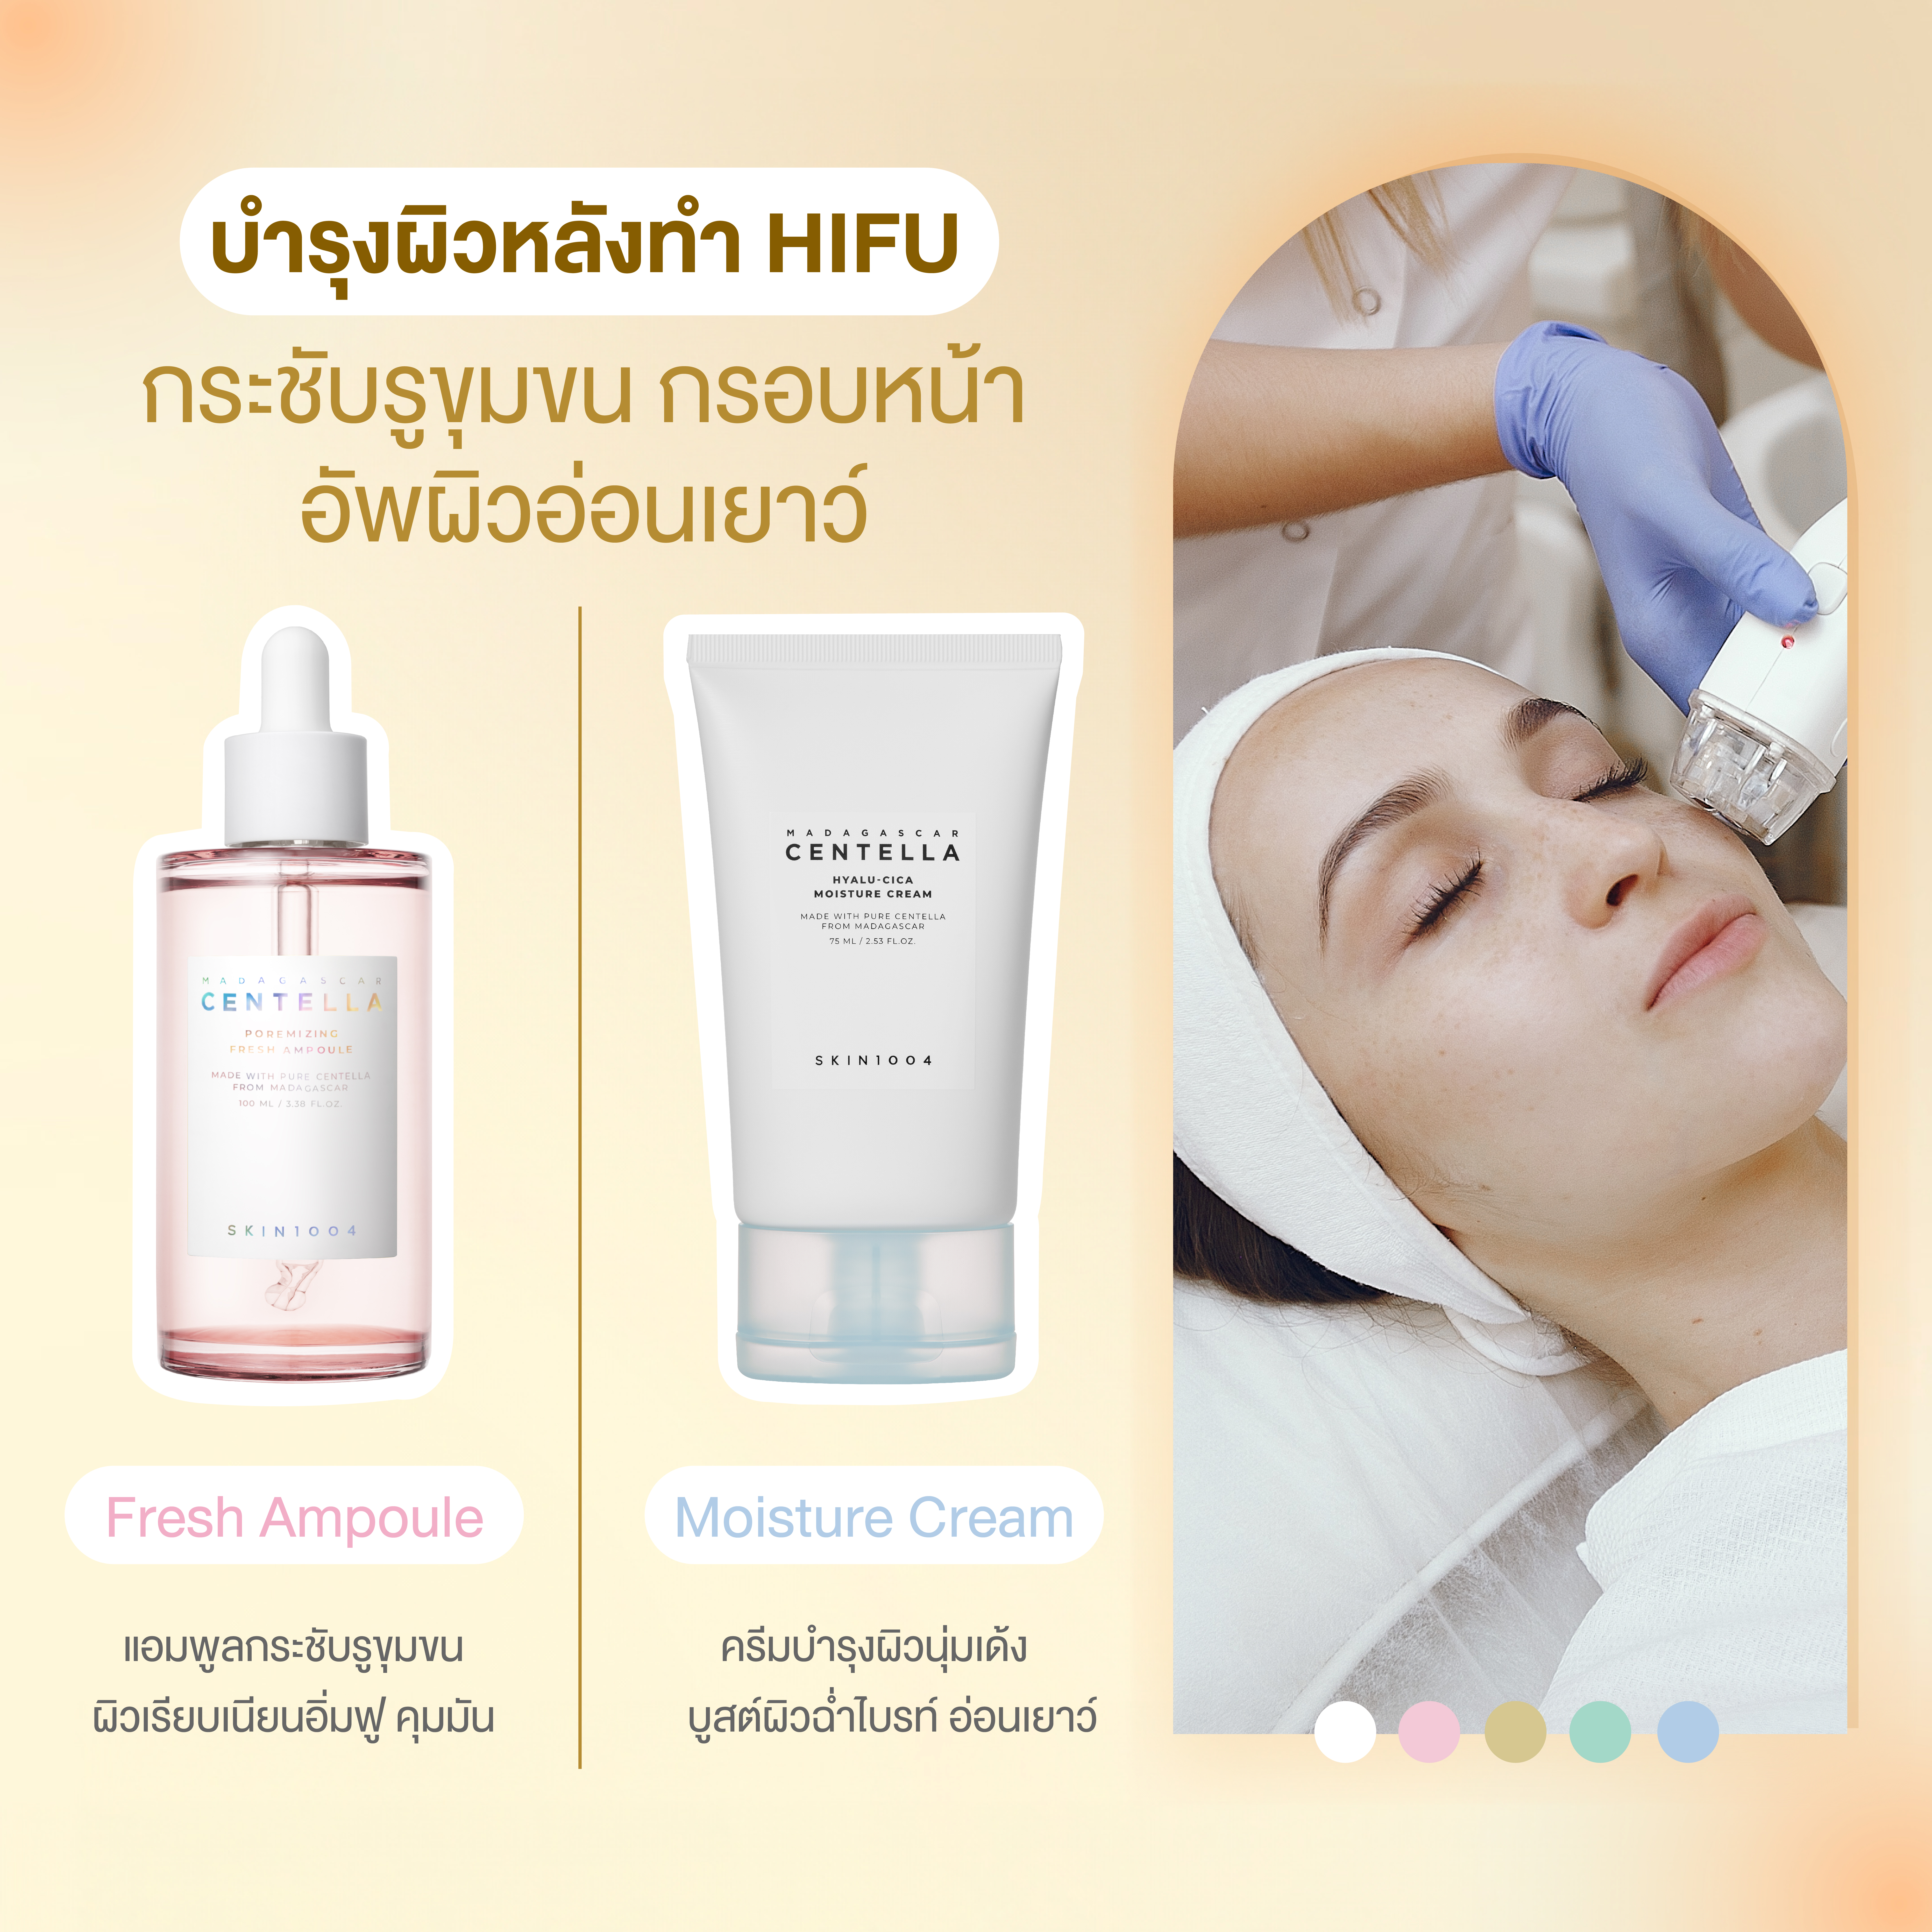  SKIN1004 - All Items for Facial Treatment - Clinic